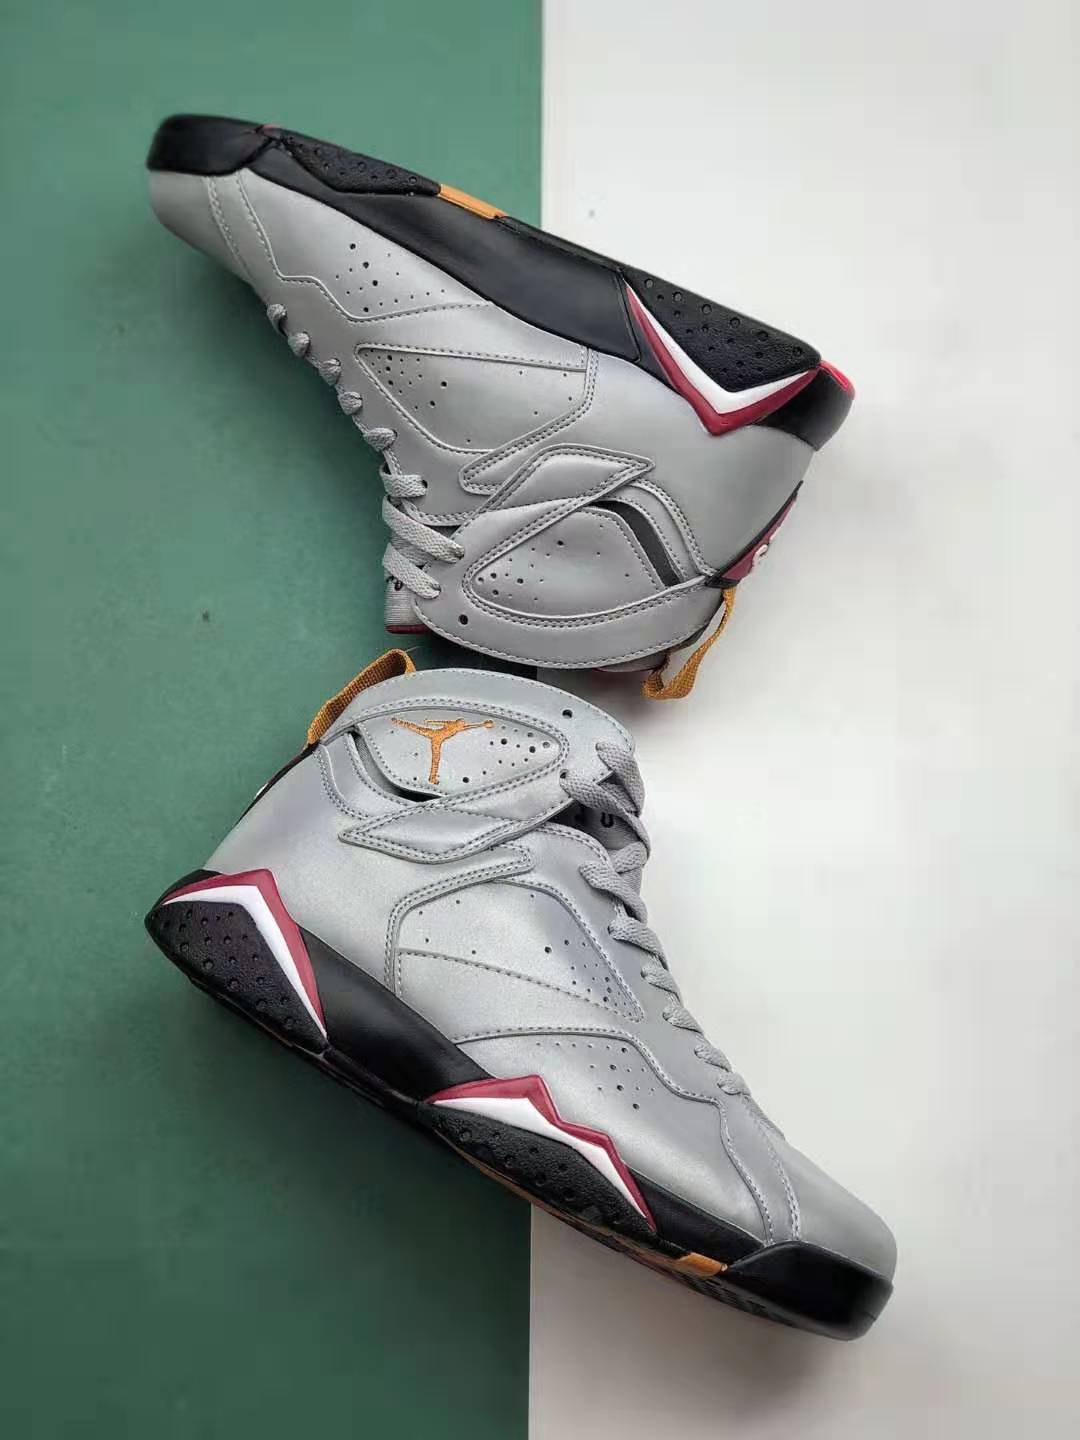 Air Jordan 7 Retro SP 'Reflections Of A Champion' BV6281-006 - Iconic Style with Reflective Detailing!